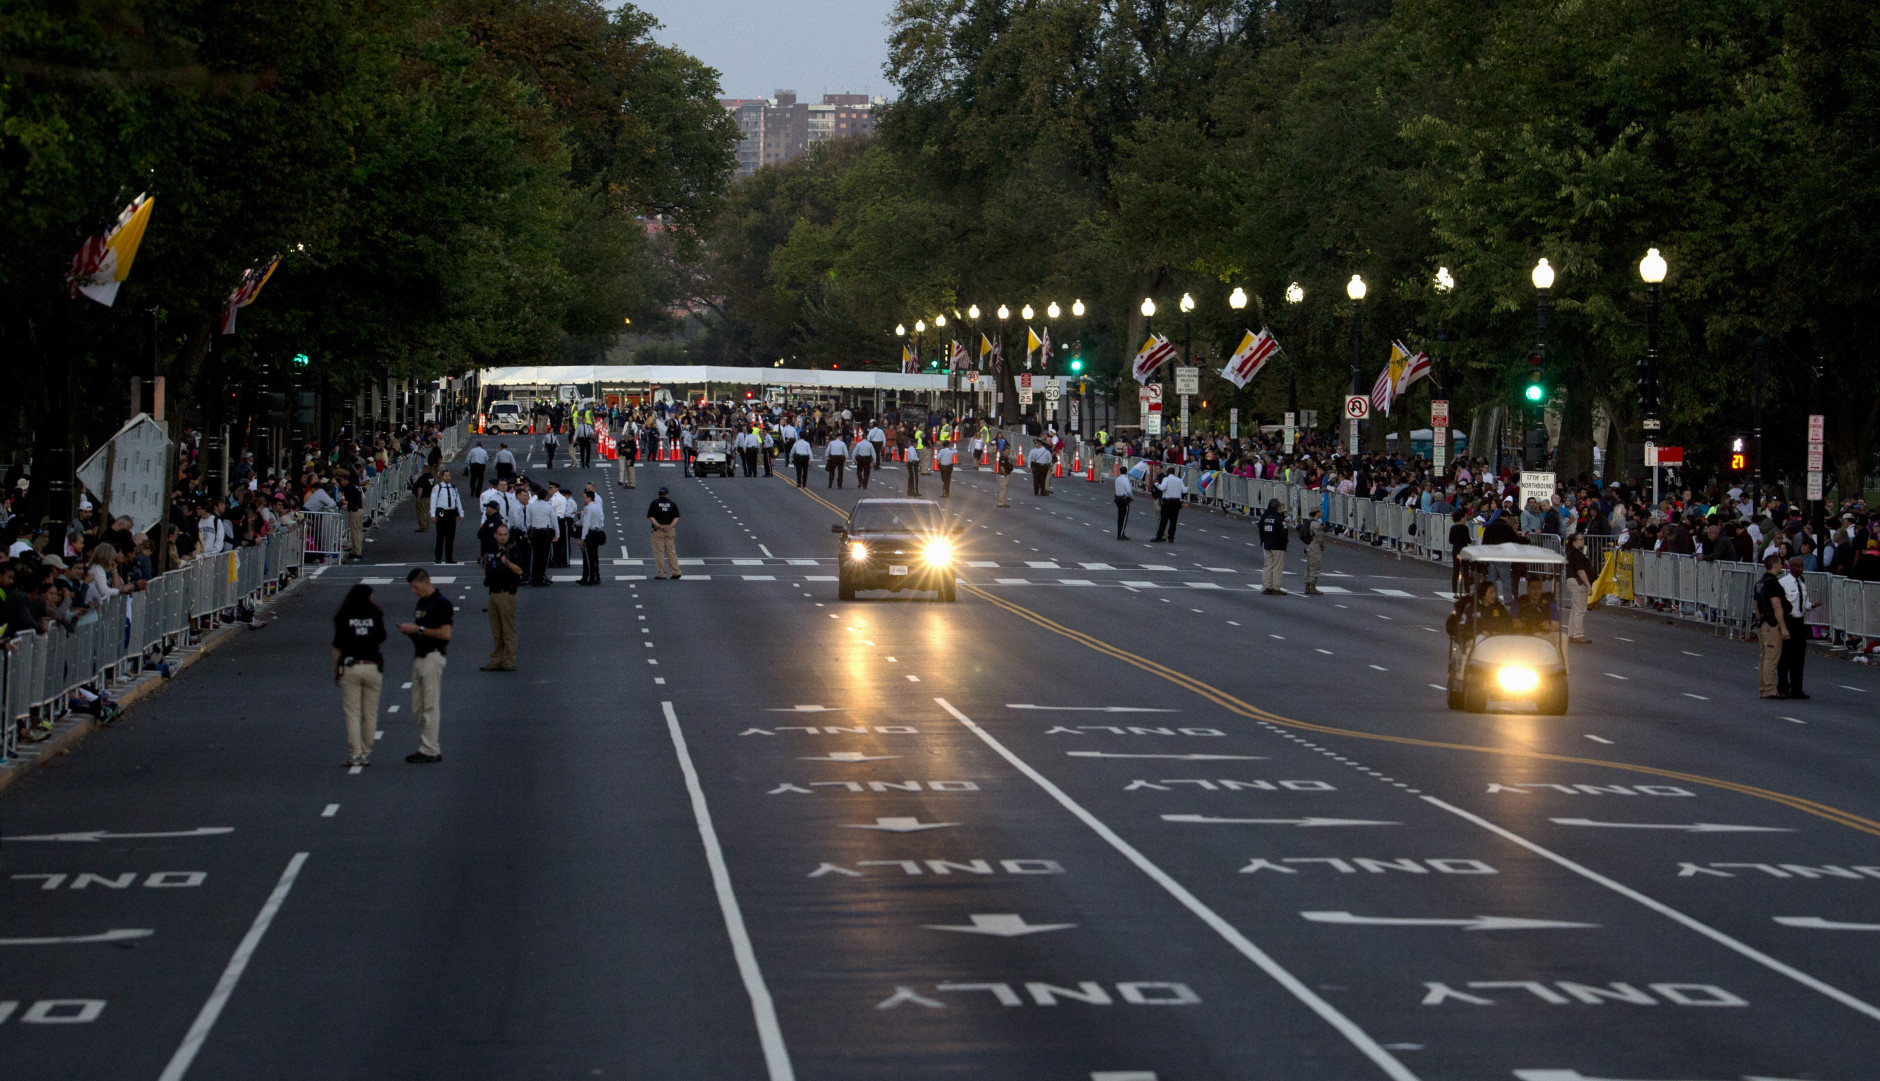 People position along a cleared Constitution Avenue along the Pope Francis parade route near the White House in Washington, Wednesday, Sept. 23, 2015. (AP Photo/Carolyn Kaster)